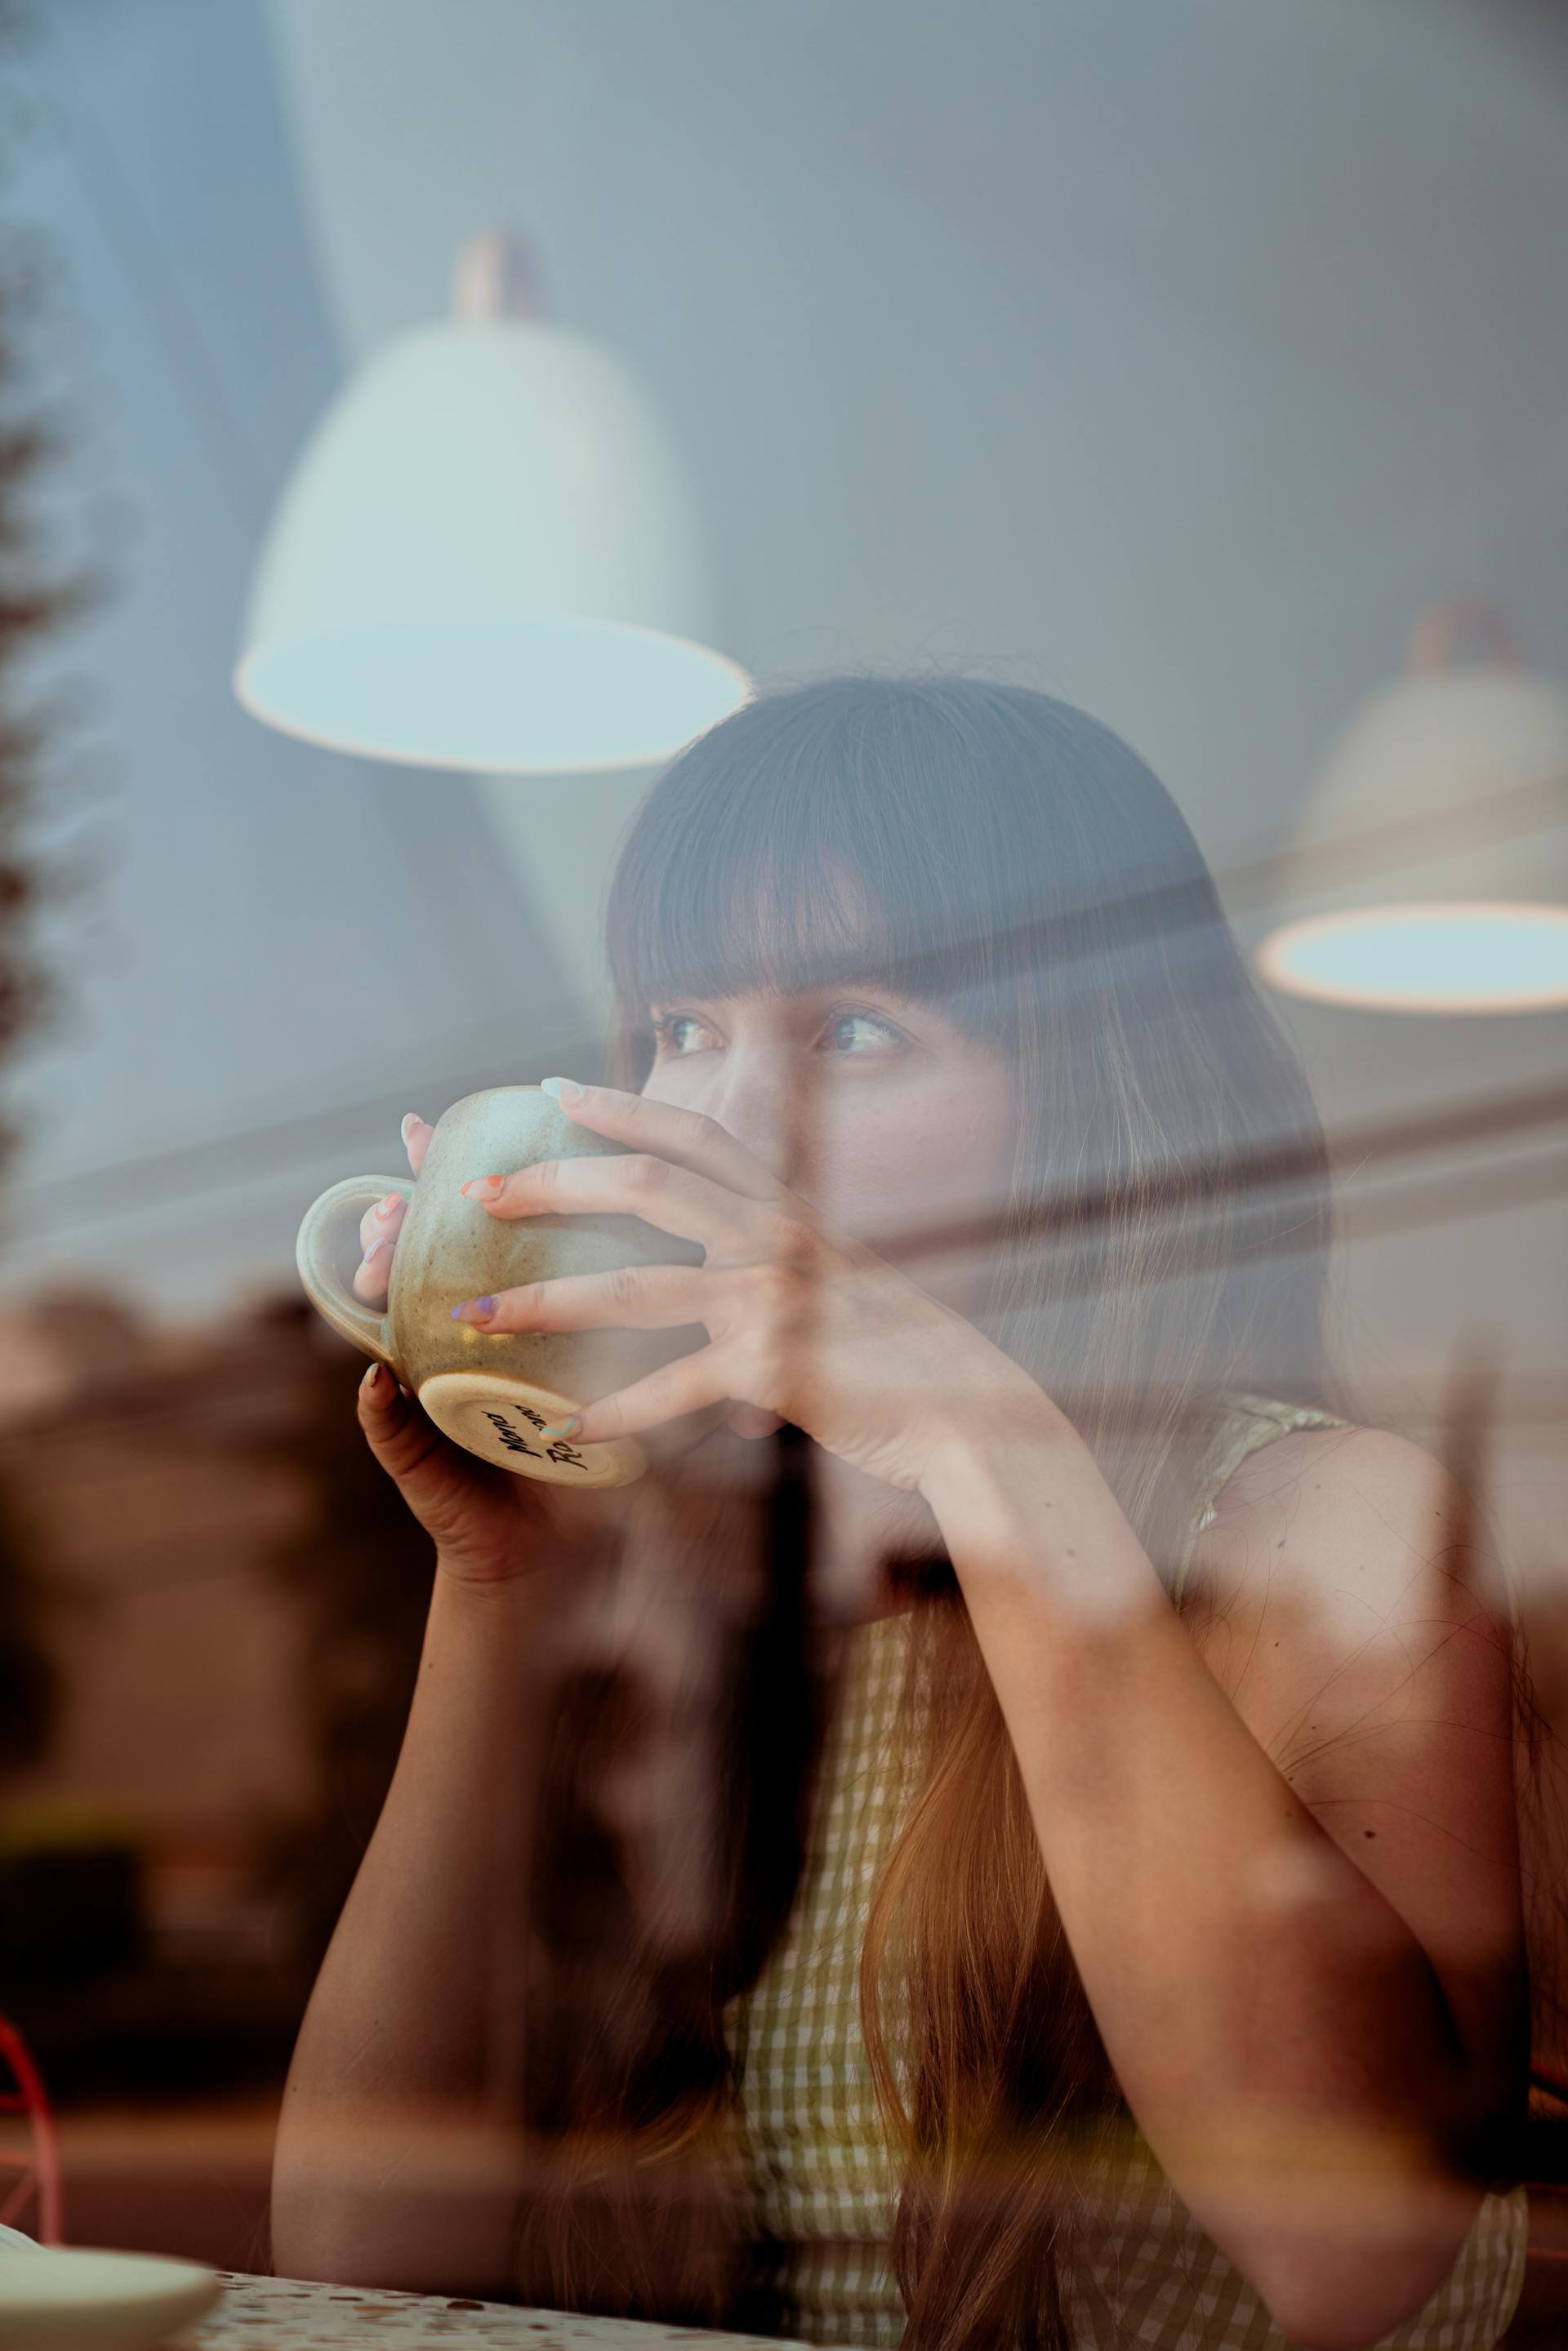 A woman drinking coffee in a cafe | Source: Pexels